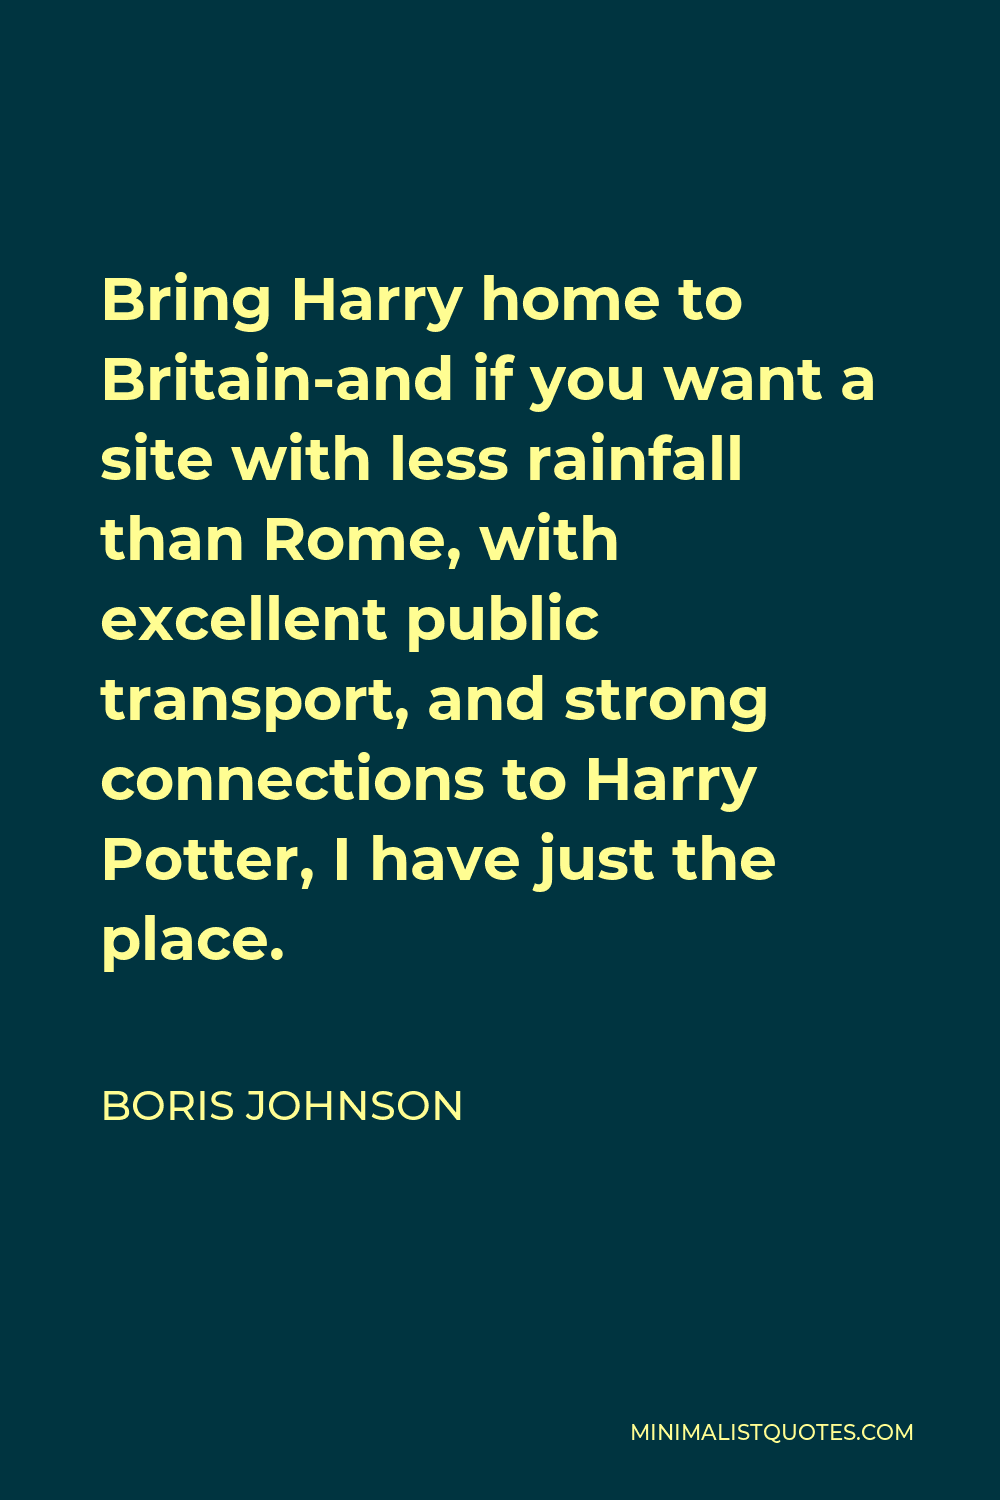 Boris Johnson Quote - Bring Harry home to Britain-and if you want a site with less rainfall than Rome, with excellent public transport, and strong connections to Harry Potter, I have just the place.